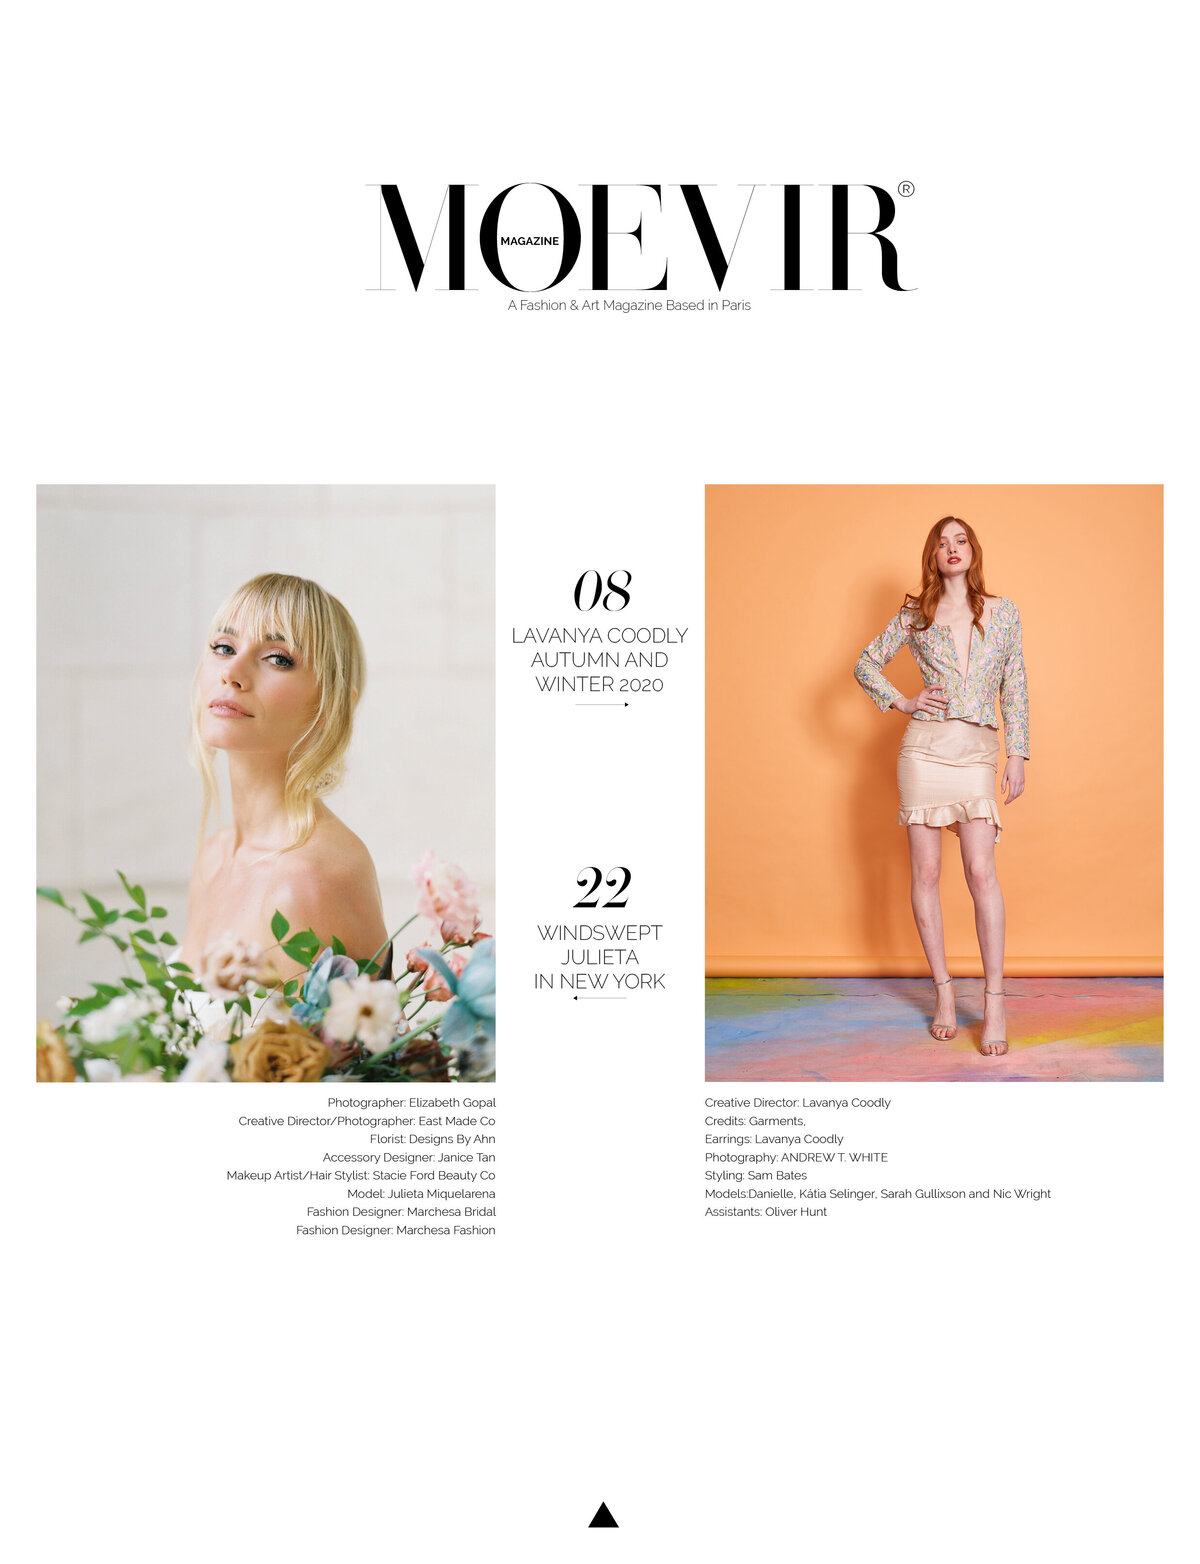 A Moevir Magazine January Issue 20216